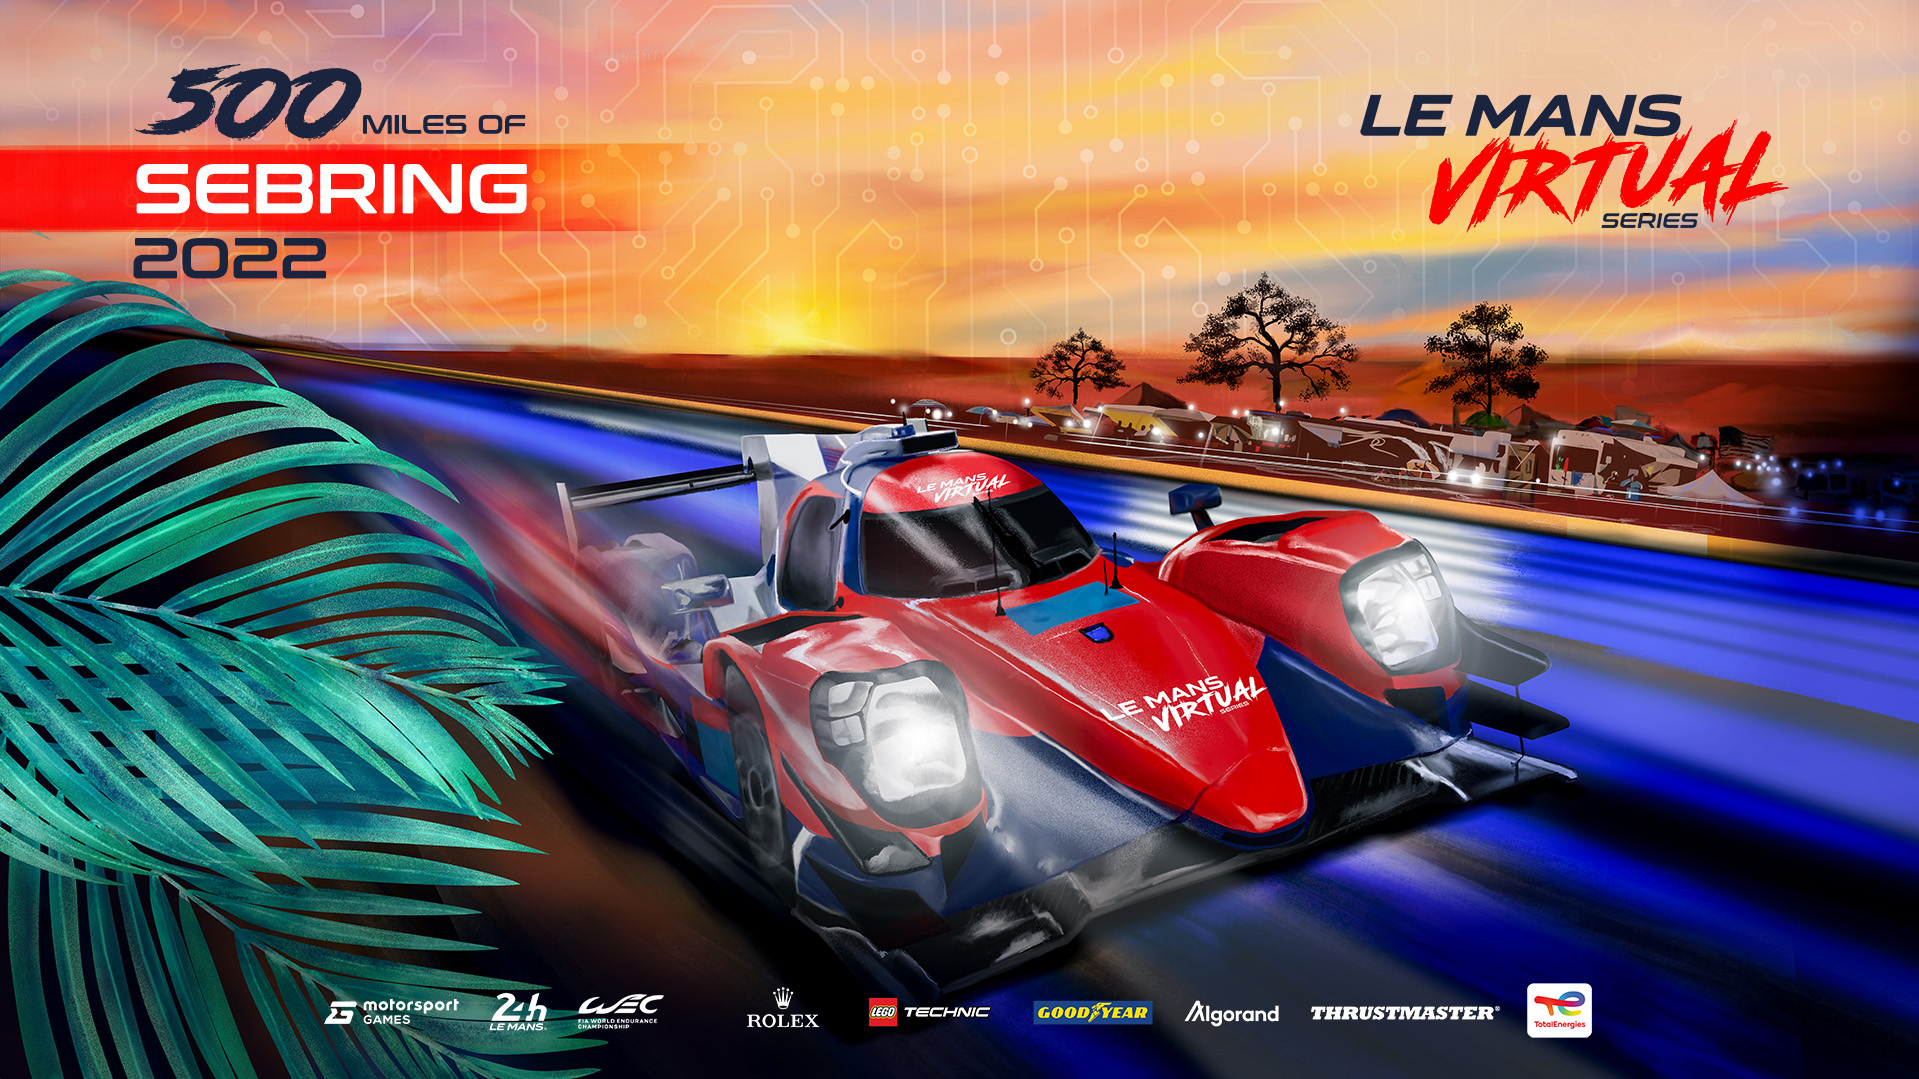 Motorsport-Games-Le-Mans-Virtual-Series-Starts-ready-to-respect-the-Sebring-bumps-1920x1080-1.jpg